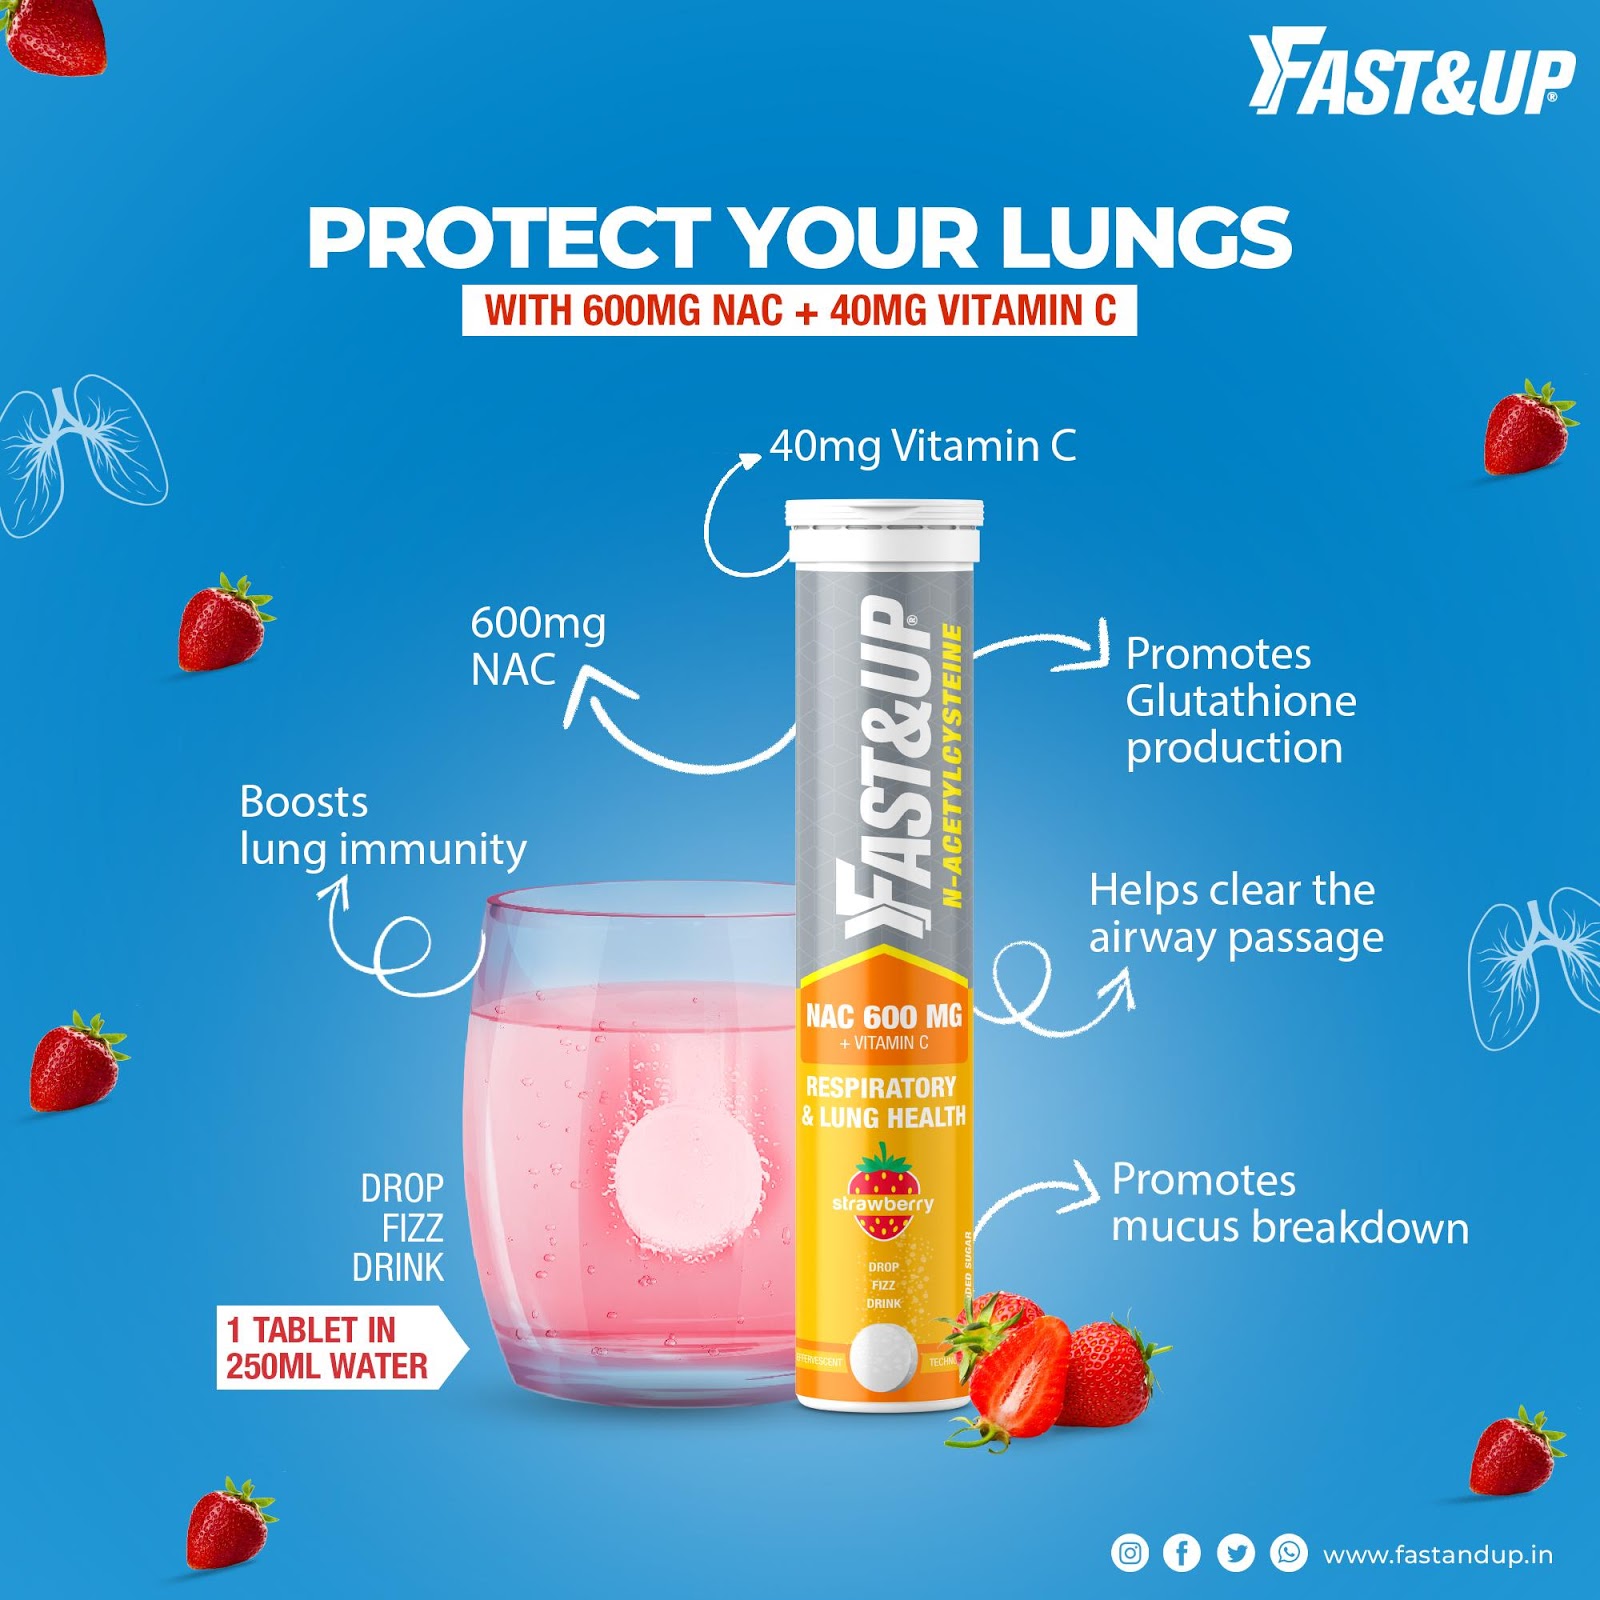 Fast&Up N- acetyl cysteine helps  to protect your lungs